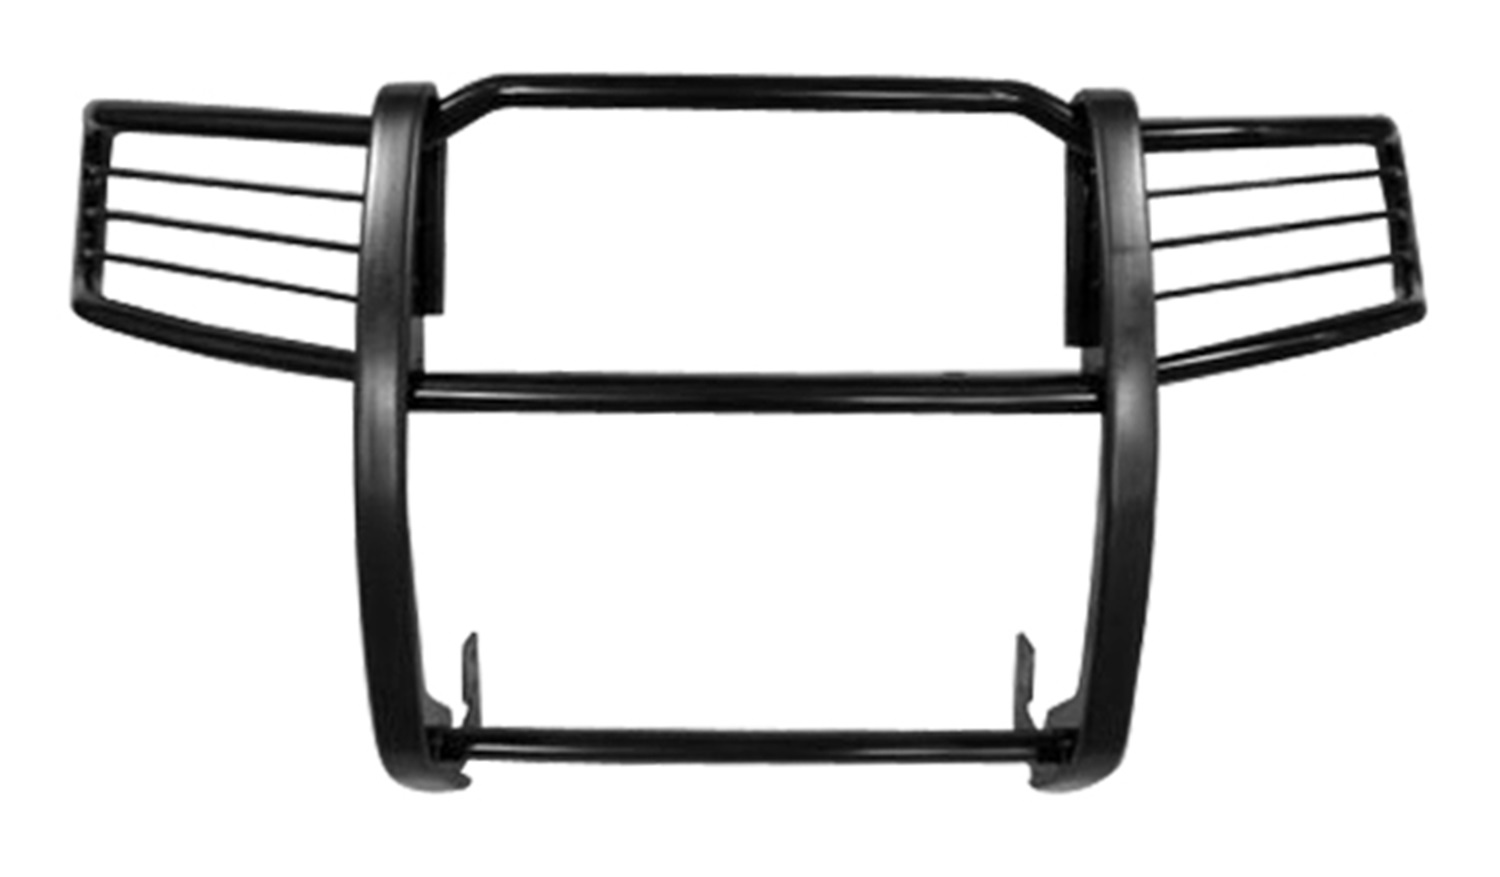 Aries Offroad Aries Offroad 2059 The Aries Bar; Grille/Brush Guard Fits 07-14 FJ Cruiser